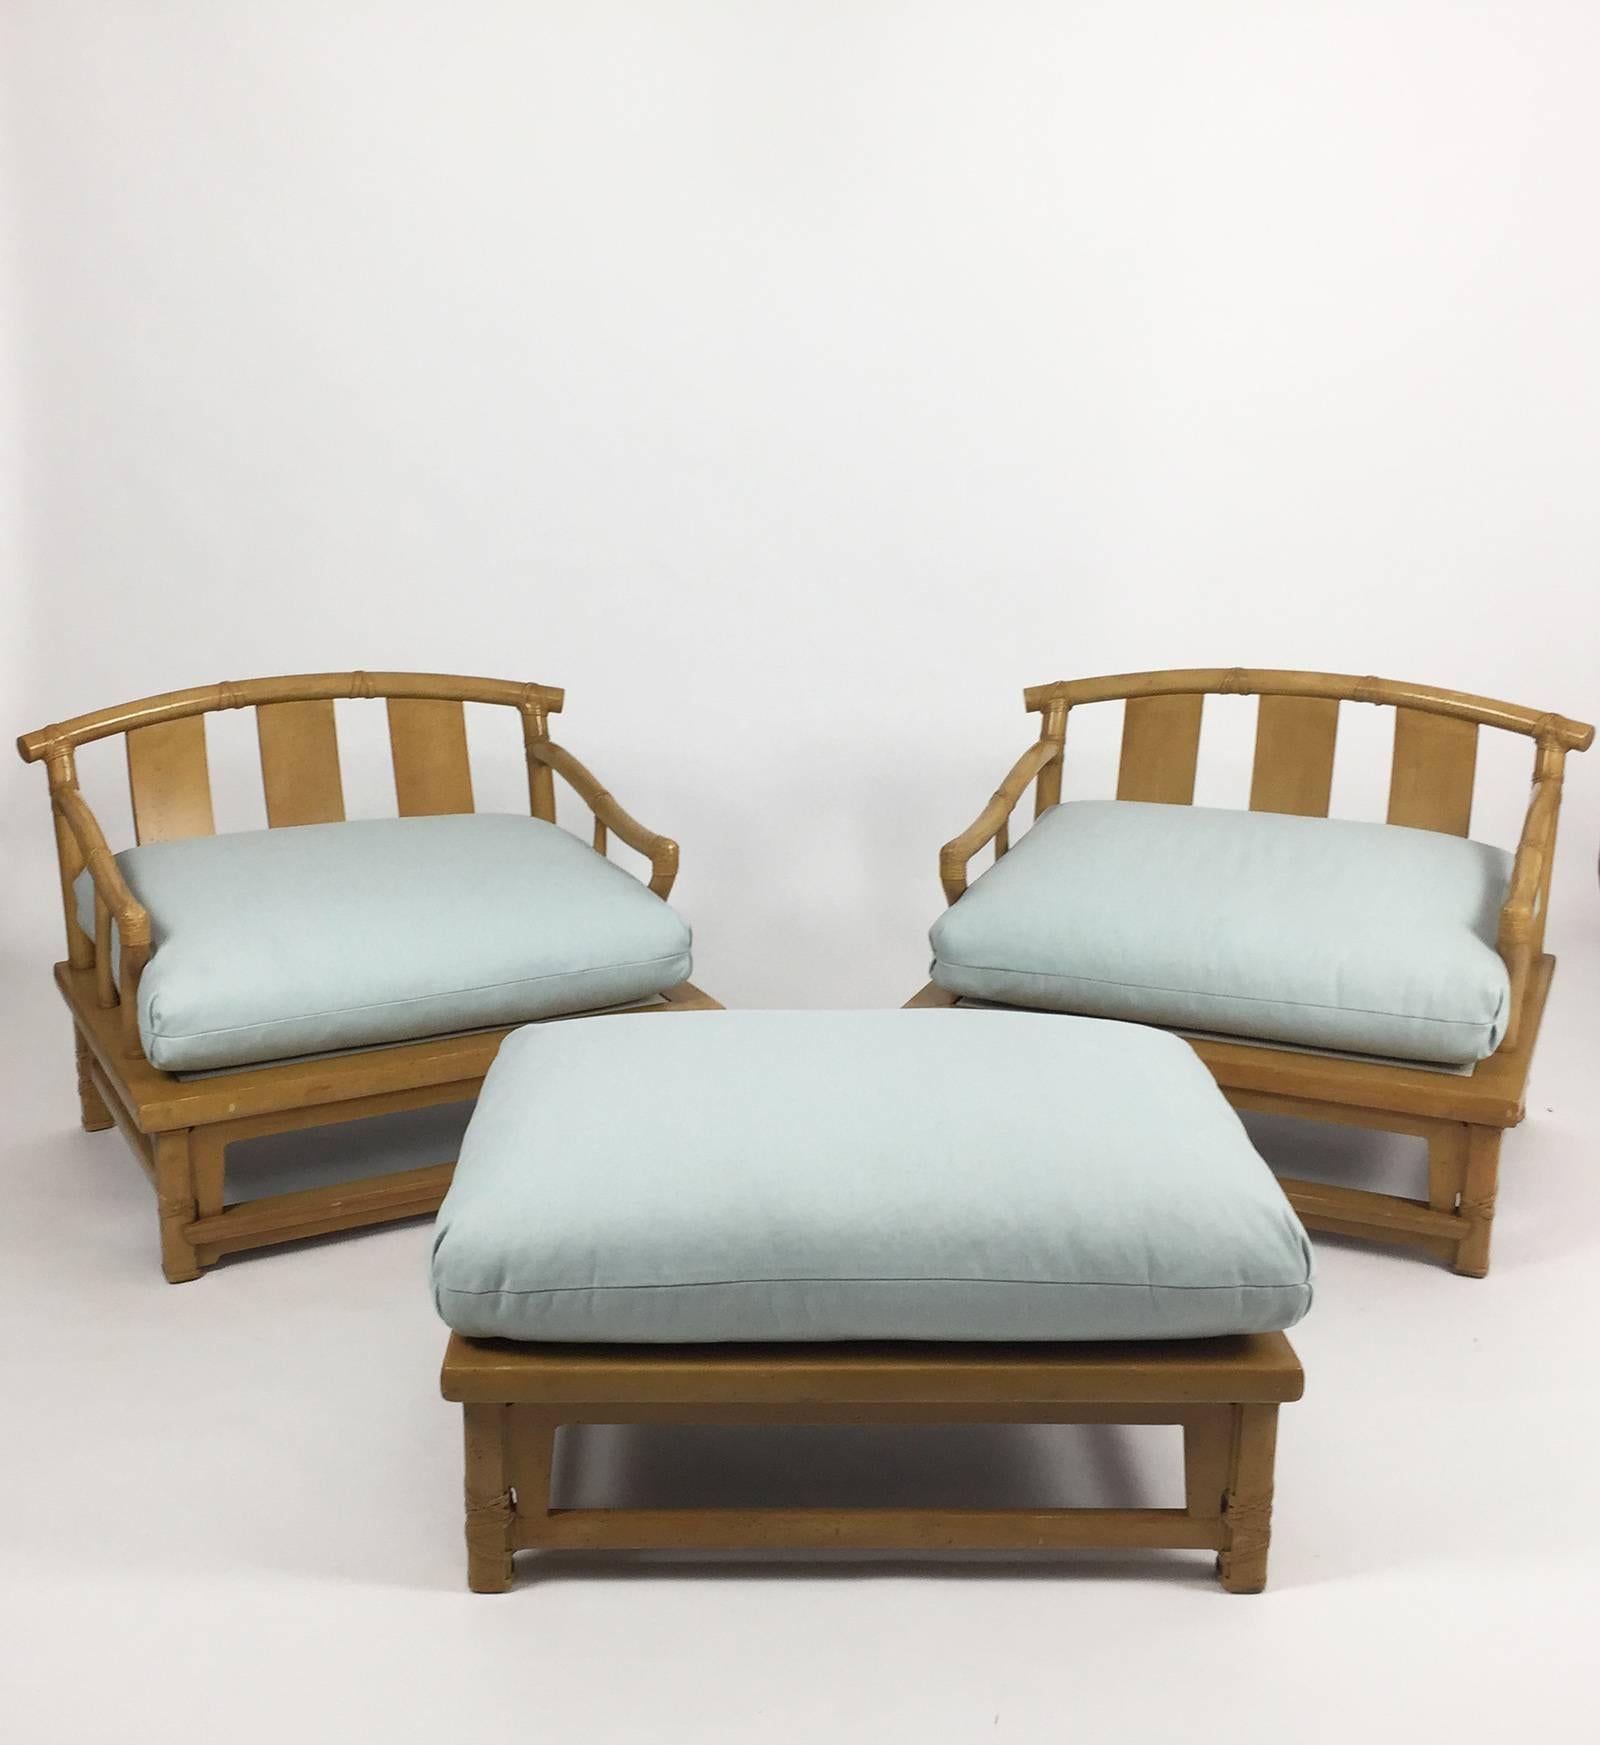 Oversized pair of yoke-back Asian style lounge armchairs and matching ottoman by Henredon from the 1990s. Executed in palm wood, in the bamboo style, with newly upholstered light blue cushions. Chinoiserie style. Made in the Philippines for